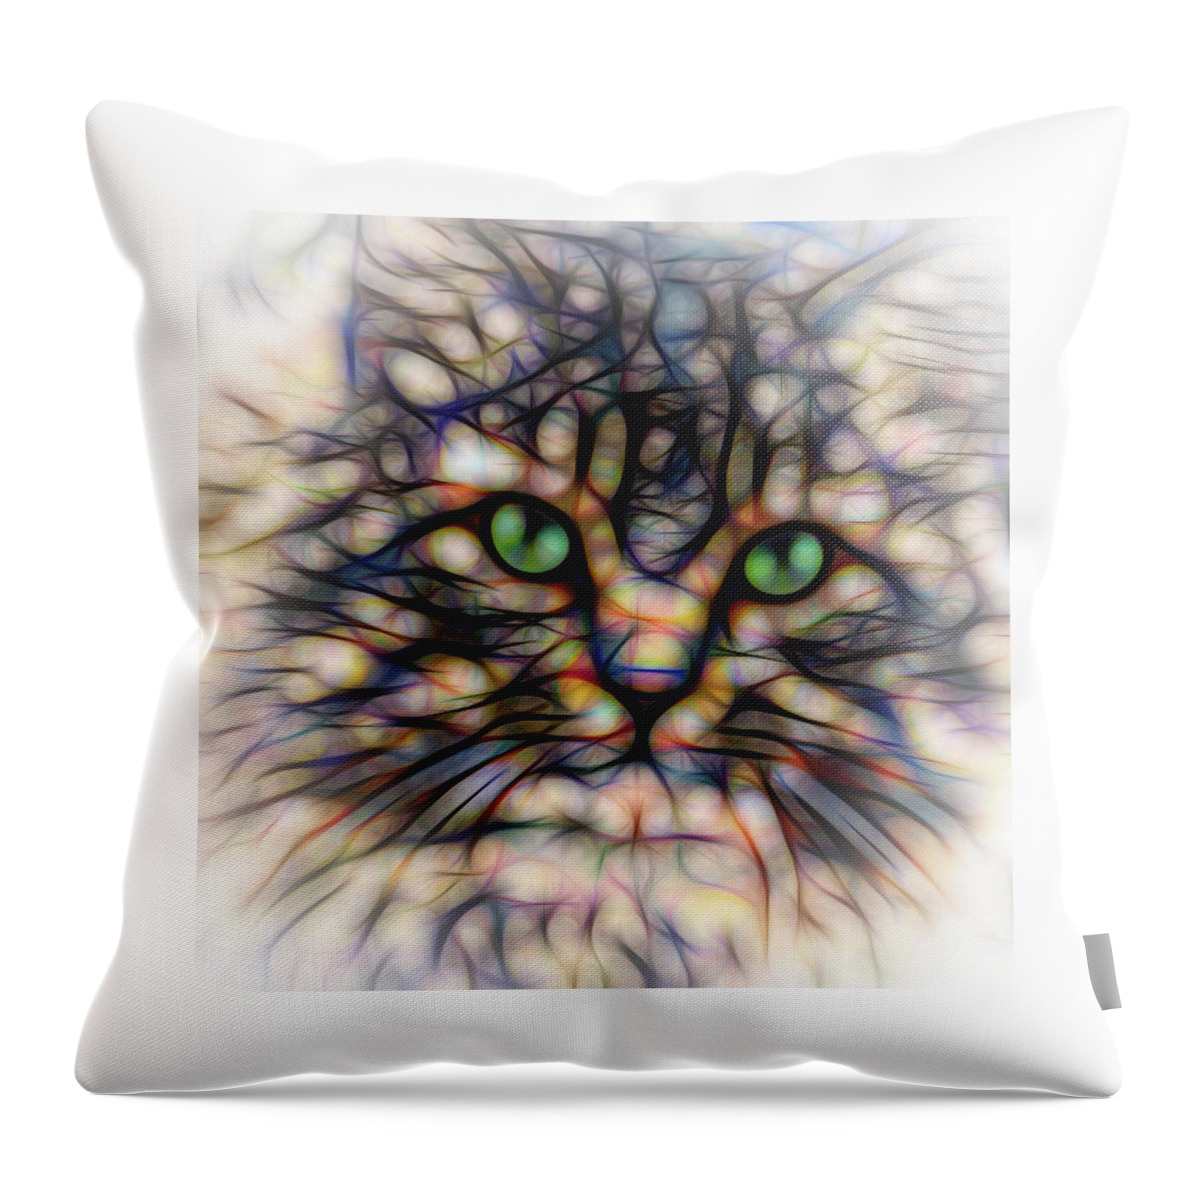 Terry D Photography Throw Pillow featuring the digital art Green Eye Kitty Square by Terry DeLuco